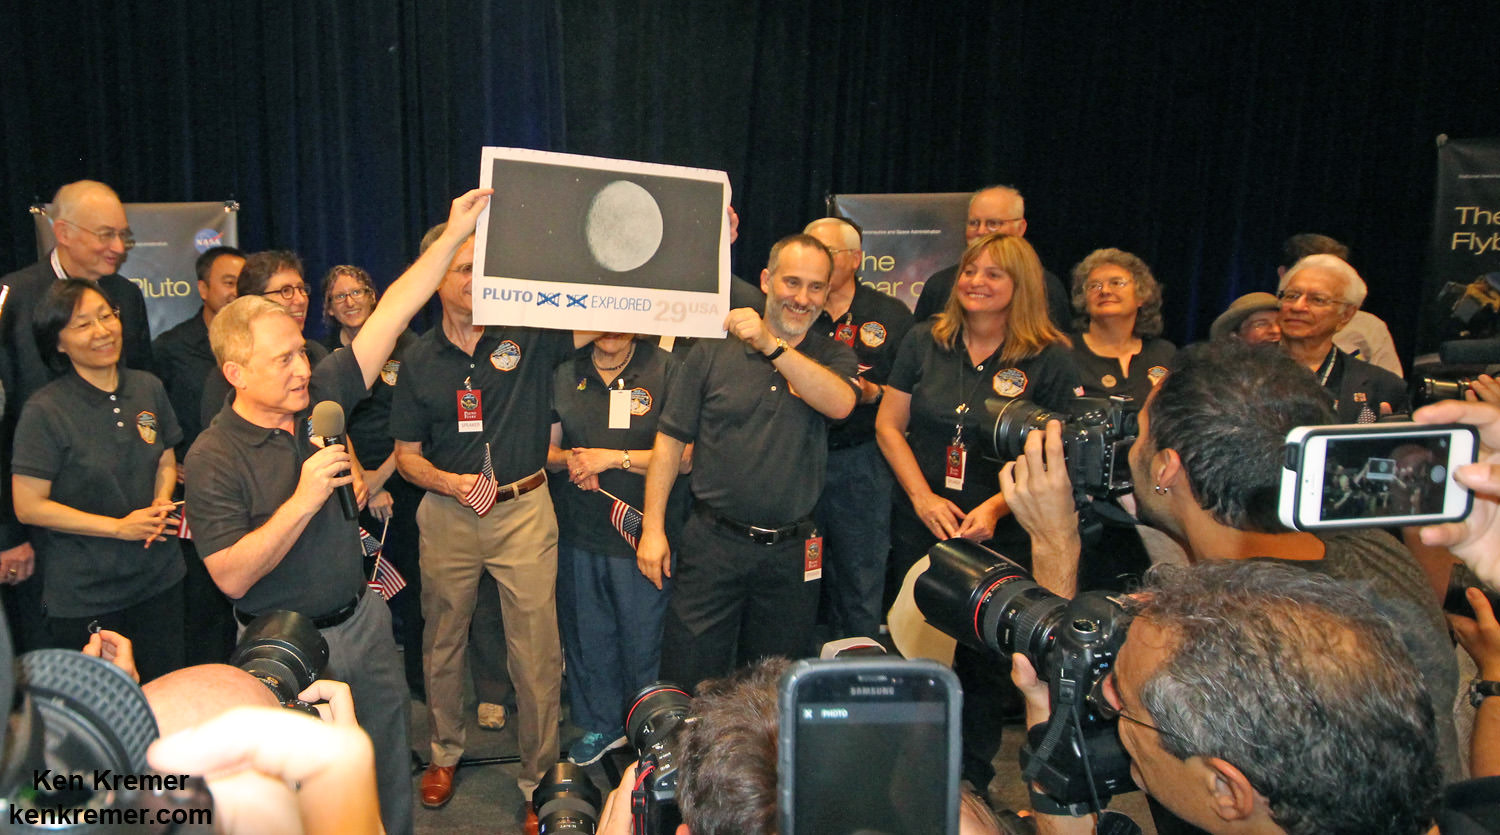 Pluto Explored at Last. The New Horizons mission team celebrates successful flyby of Pluto in the moments after closest approach at 7:49 a.m. EDT on July 14, 2015.   New Horizons Principal Investigator Alan Stern of Southwest Research Institute (SwRI), Boulder, CO., left, Johns Hopkins University Applied Physics Laboratory (APL) Director Ralph Semmel, center, and New Horizons Co-Investigator Will Grundy Lowell Observatory hold an enlarged print of an U.S. stamp with their suggested update after Pluto became the final planet in our solar system to be explored by an American space probe (crossing out the words ‘not yet’) - at the Johns Hopkins University Applied Physics Laboratory (APL) in Laurel, Maryland.  Credit: Ken Kremer/kenkremer.com 